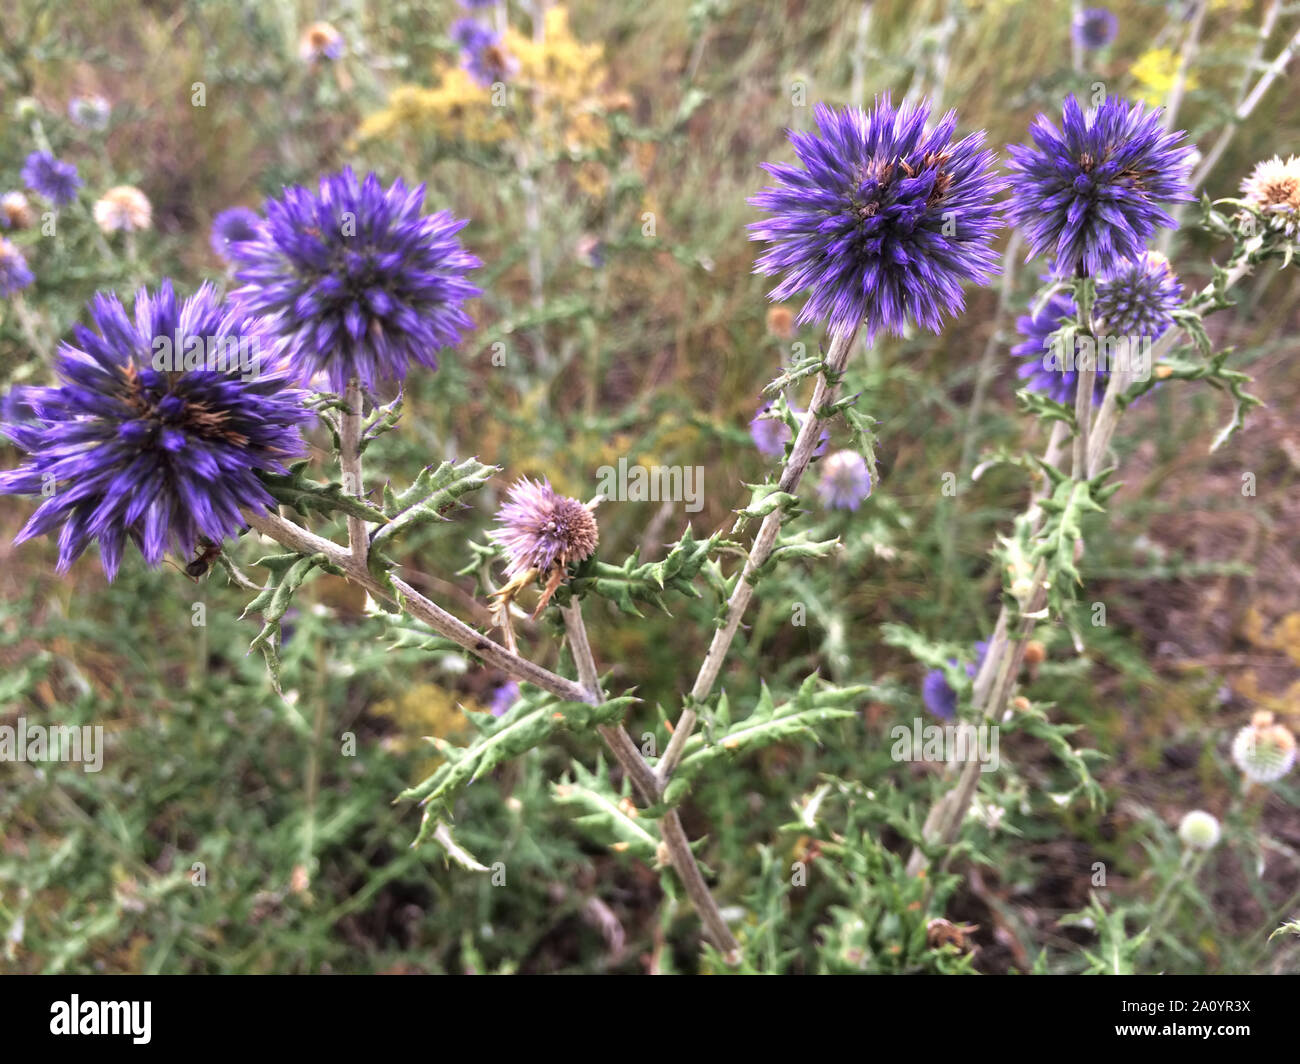 Blooming Echinops ritro, Globe thistle in July. Close-up, selected focus Stock Photo